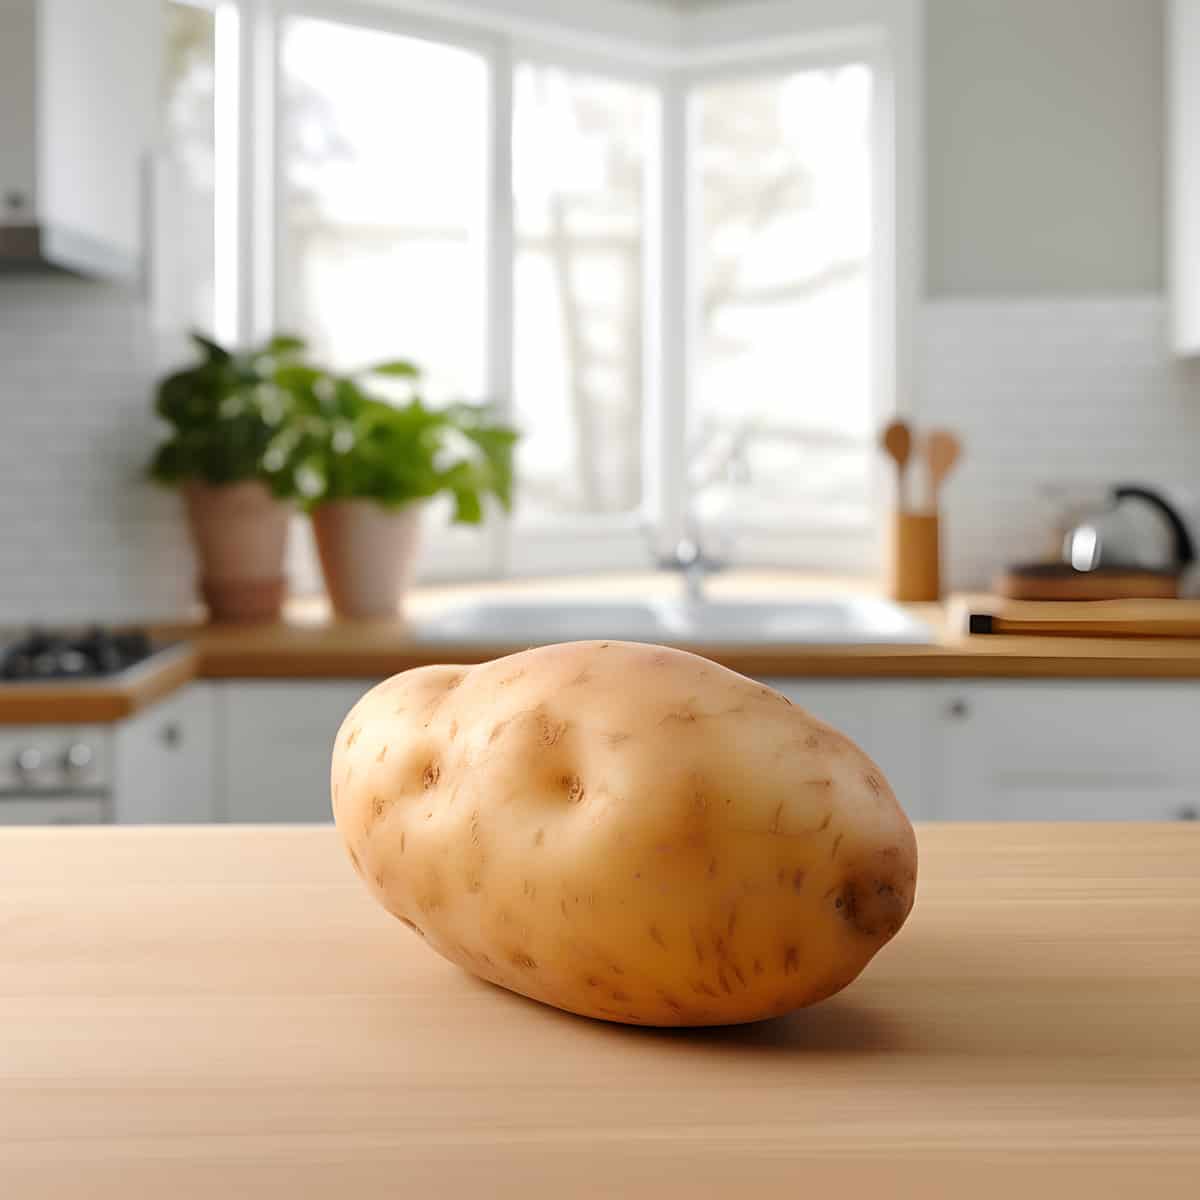 Remarka Potatoes on a kitchen counter